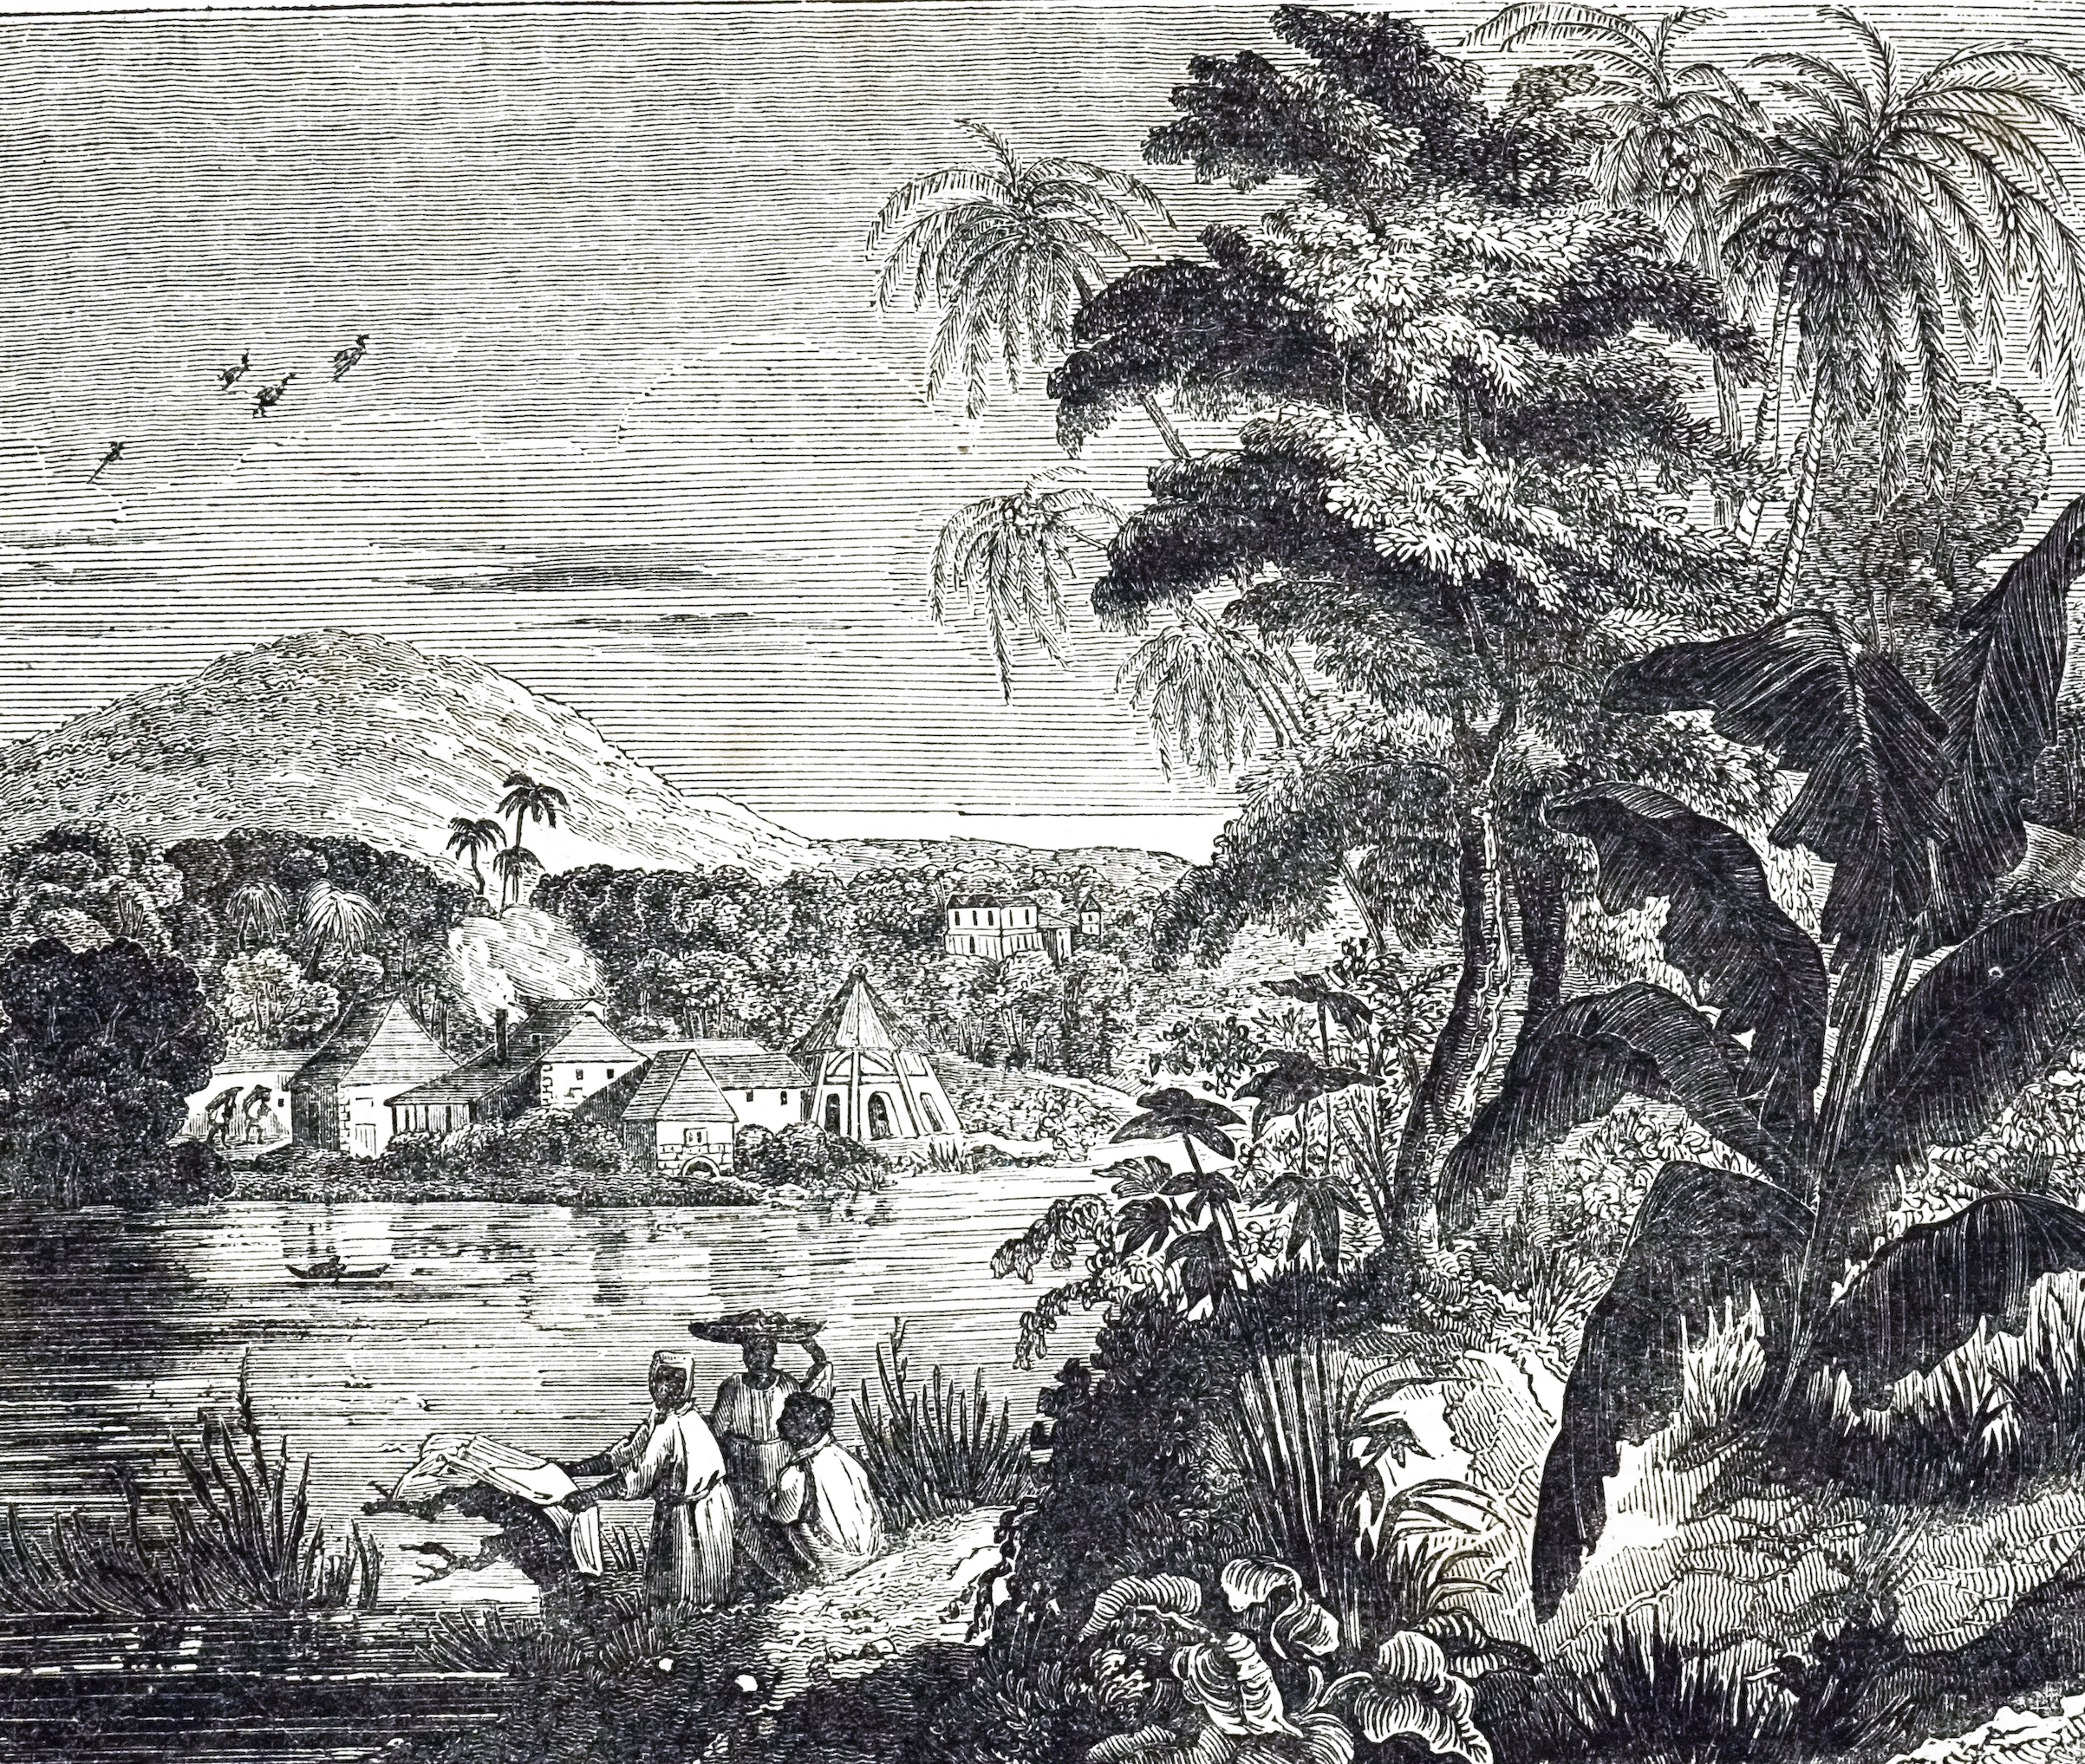 An engraving depicting a Jamaican sugarcane plantation during the sugar boom. African slaves harvested the sugar cane for their British owners. Dated 19th century. (Universal Images Group/Getty)